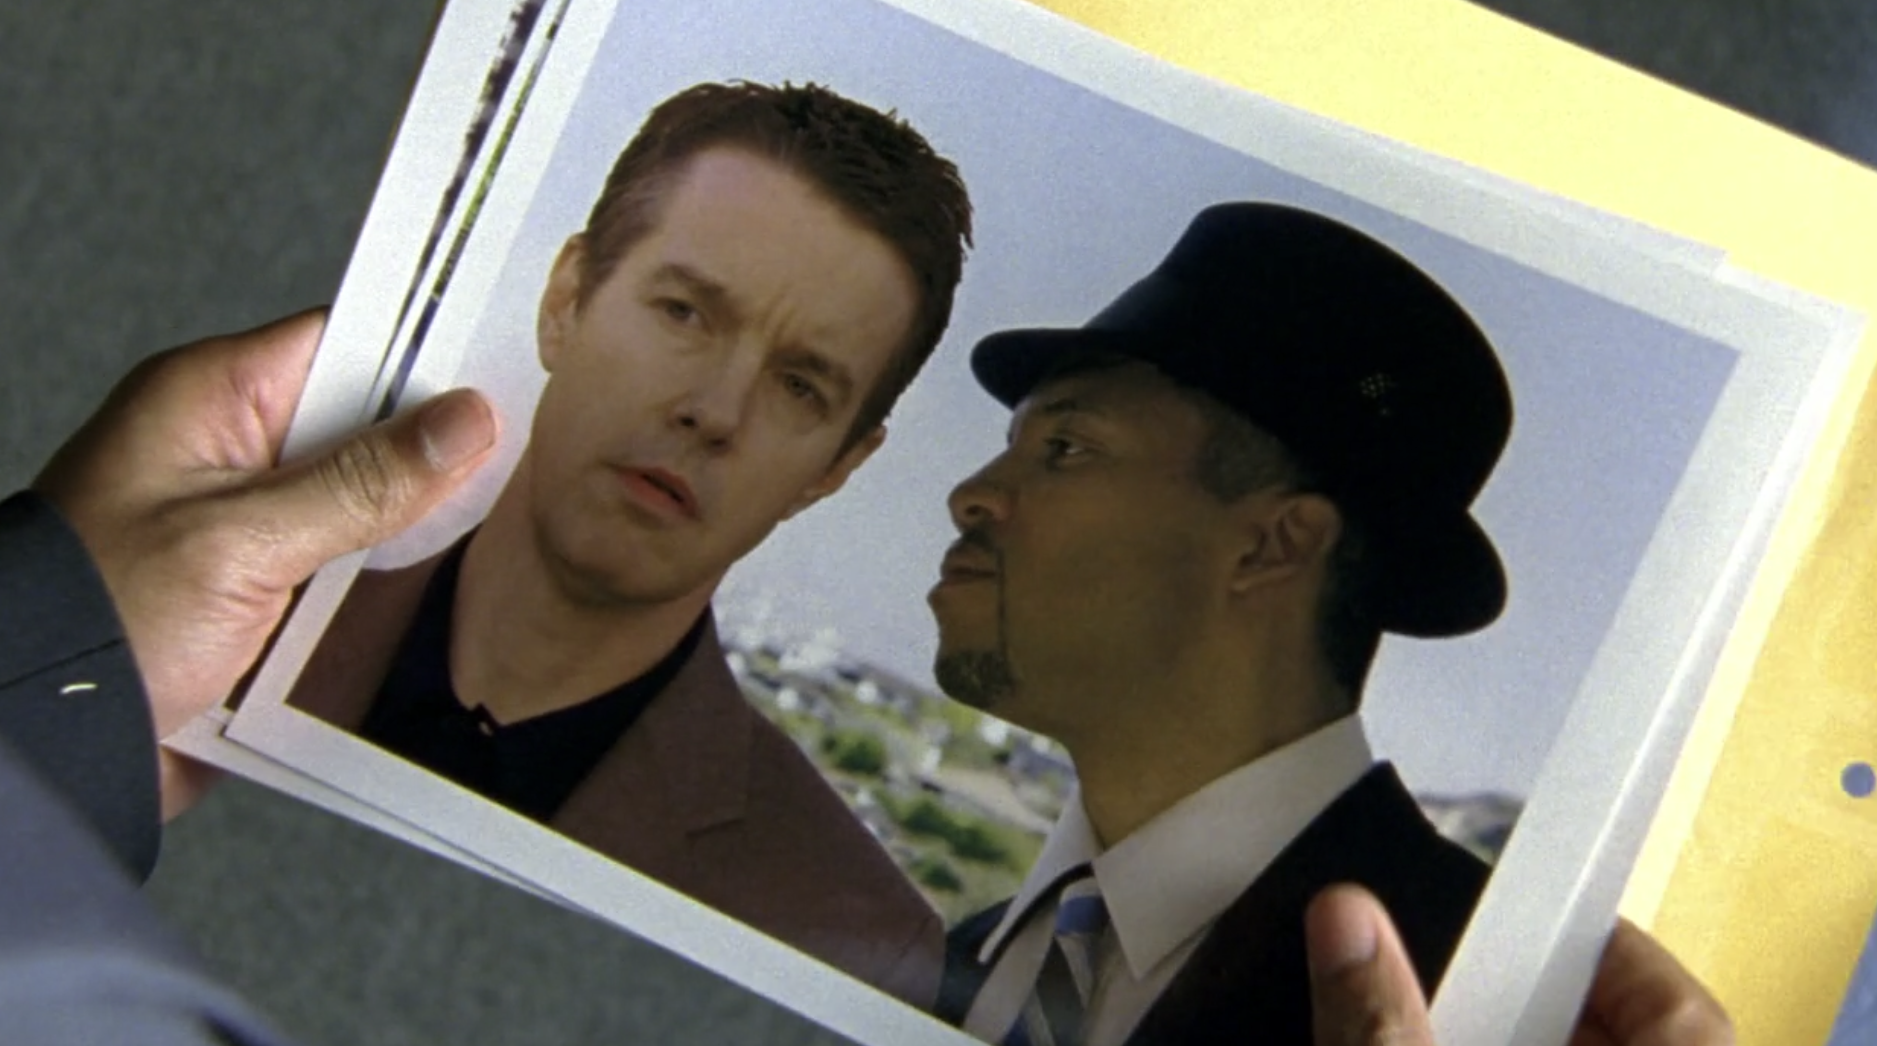 Screenshot of S1E11 of Veronica Mars. Clarence Wiedman's hands holding an 8x10 photograph of Jake Kane staring ahead and Clarence Wiedman beside him in a dark suit and fedora facing sideways and leaning in to say something discreetly to Jake.